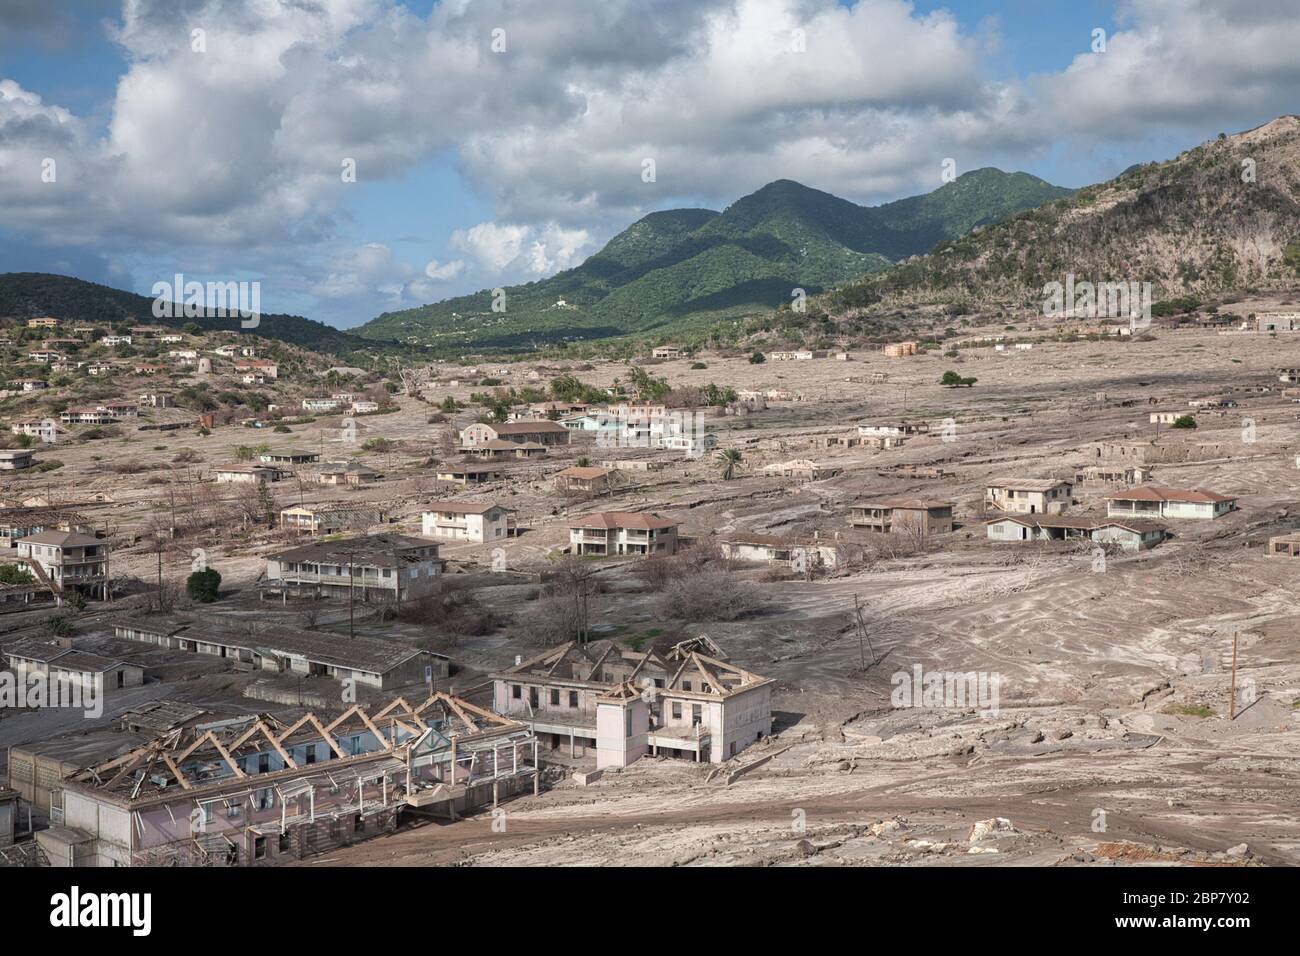 Plymouth, the old Capital of Montserrat in the Caribbean, West Indies, buried under mud and lava flows from the Soufriere Hills volcano in 1997 Stock Photo